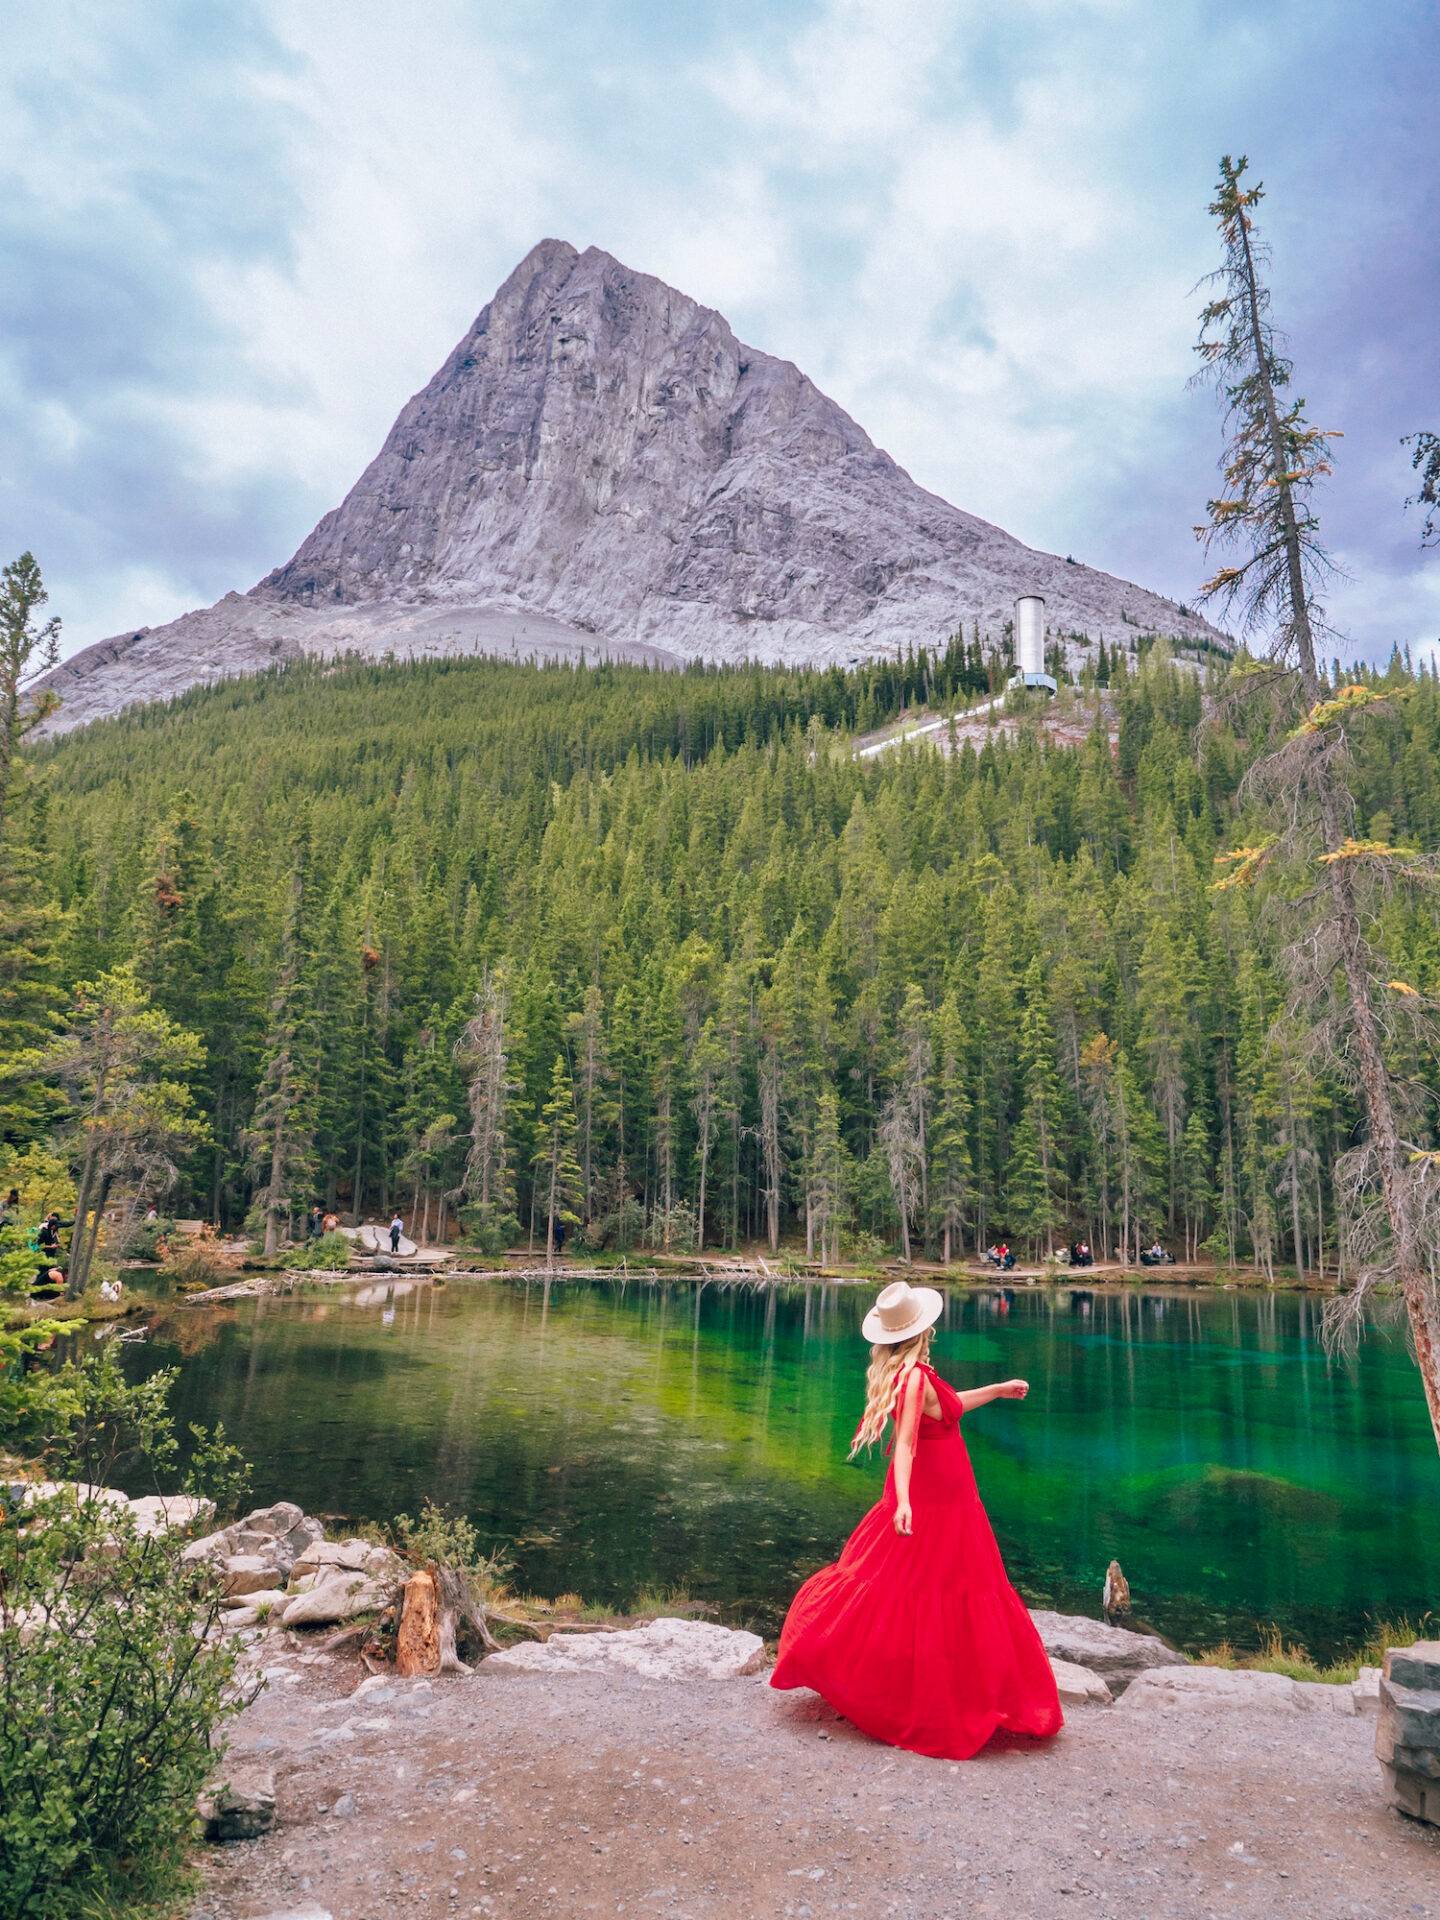 Visiting Banff National Park soon? Don't miss this guide of the 50 best things to in Banff for every kind of traveler! I recently spent 8 days exploring the area and took notes along the way so I could write you the most comprehensive guide possible. This guide includes all the top attractions, hikes, restaurants, and sights you definitely won't want to miss when you visit Banff National Park. I also include any tips you might need when visiting the area! Pictured here: The Grassi Lakes hike in Canmore gives you amazing views!